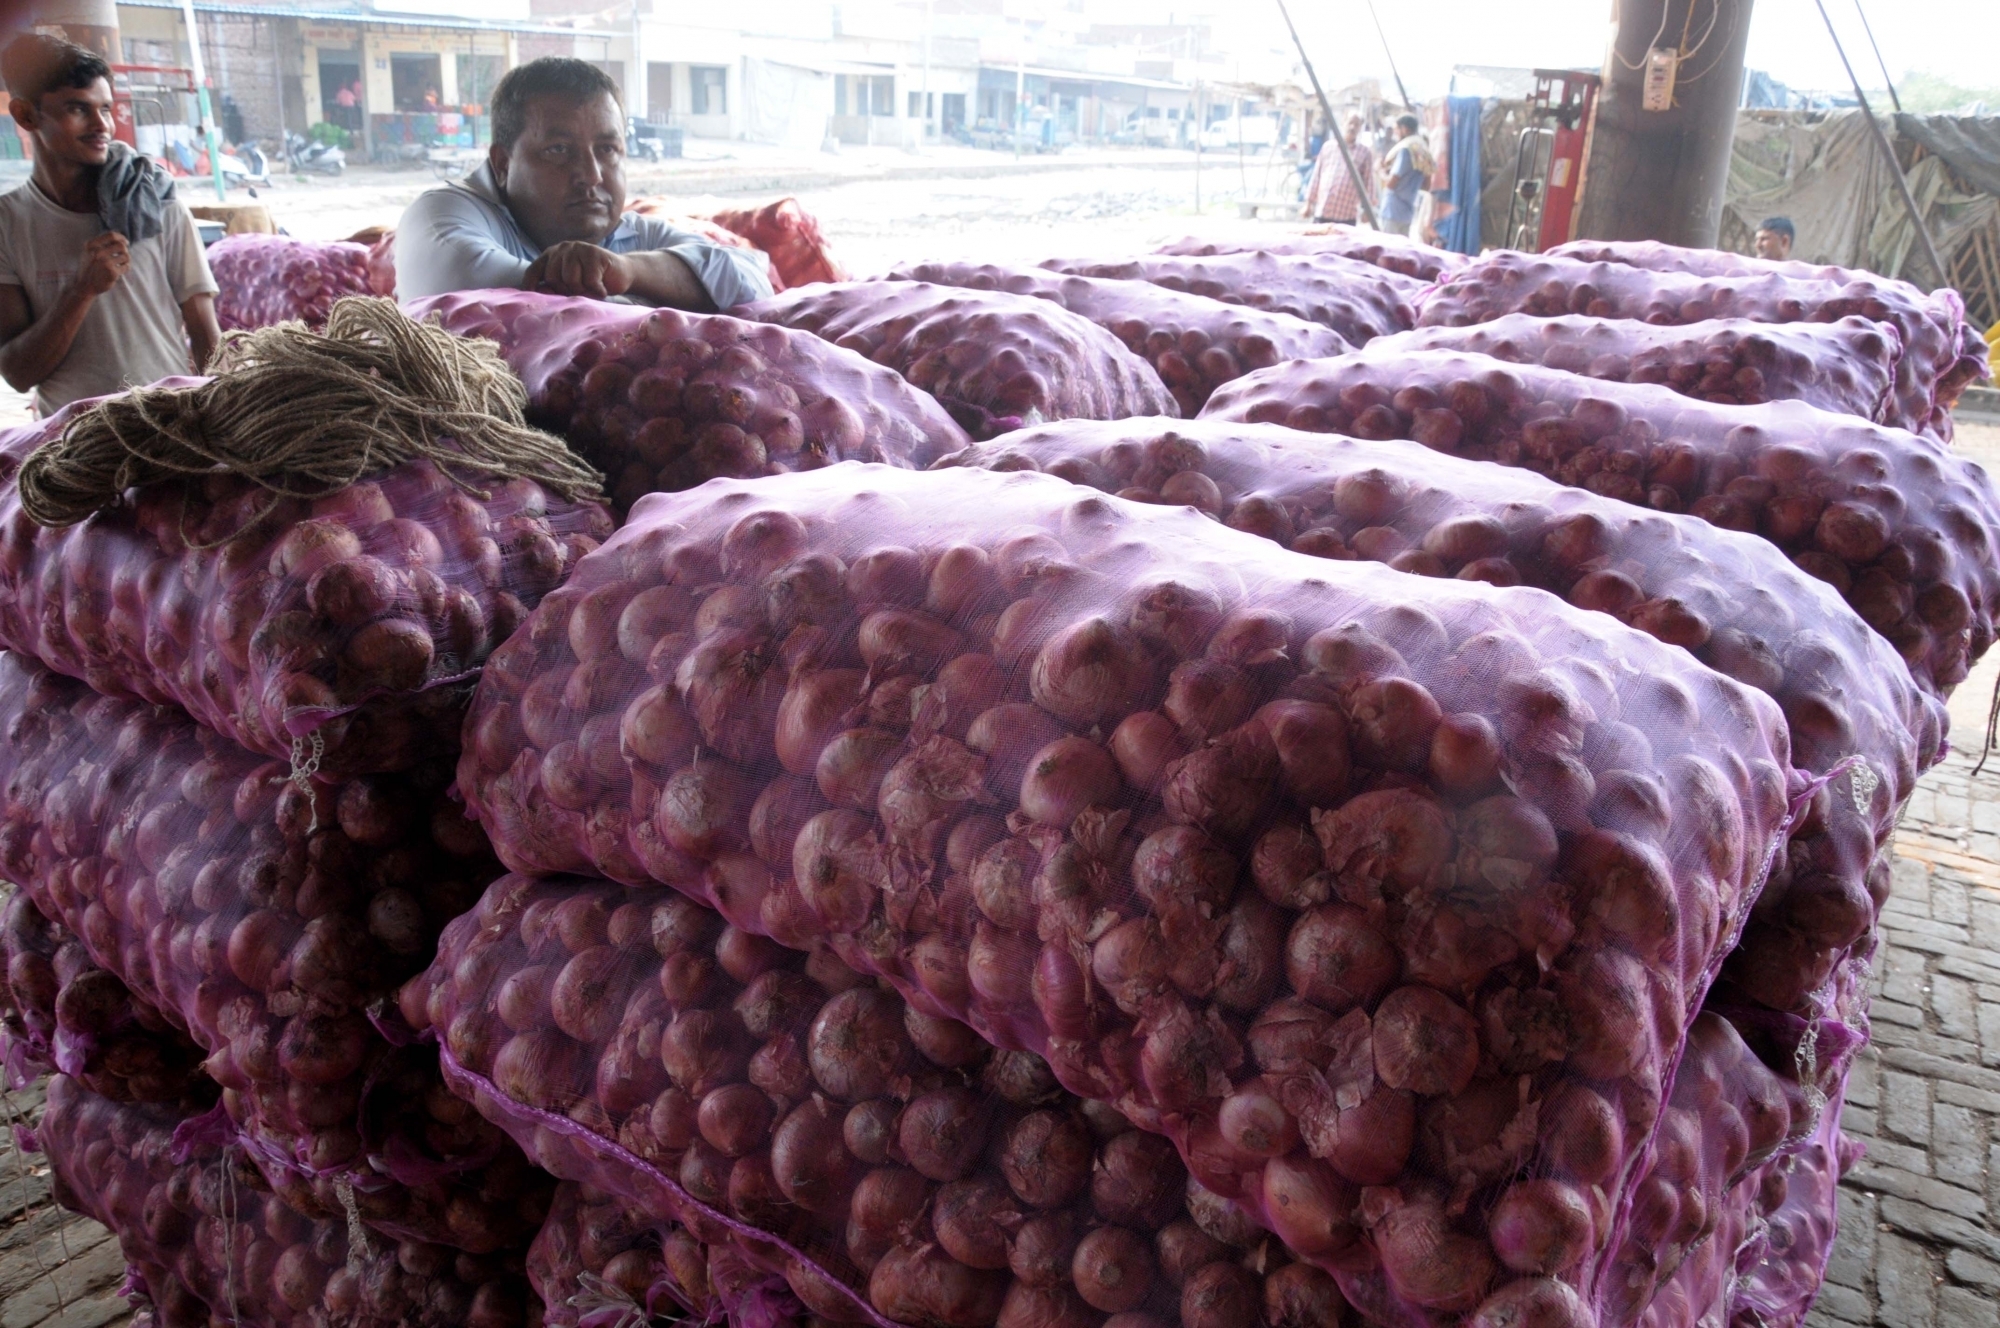 Modi government approves import of 1.2 lakh tonnes of onion